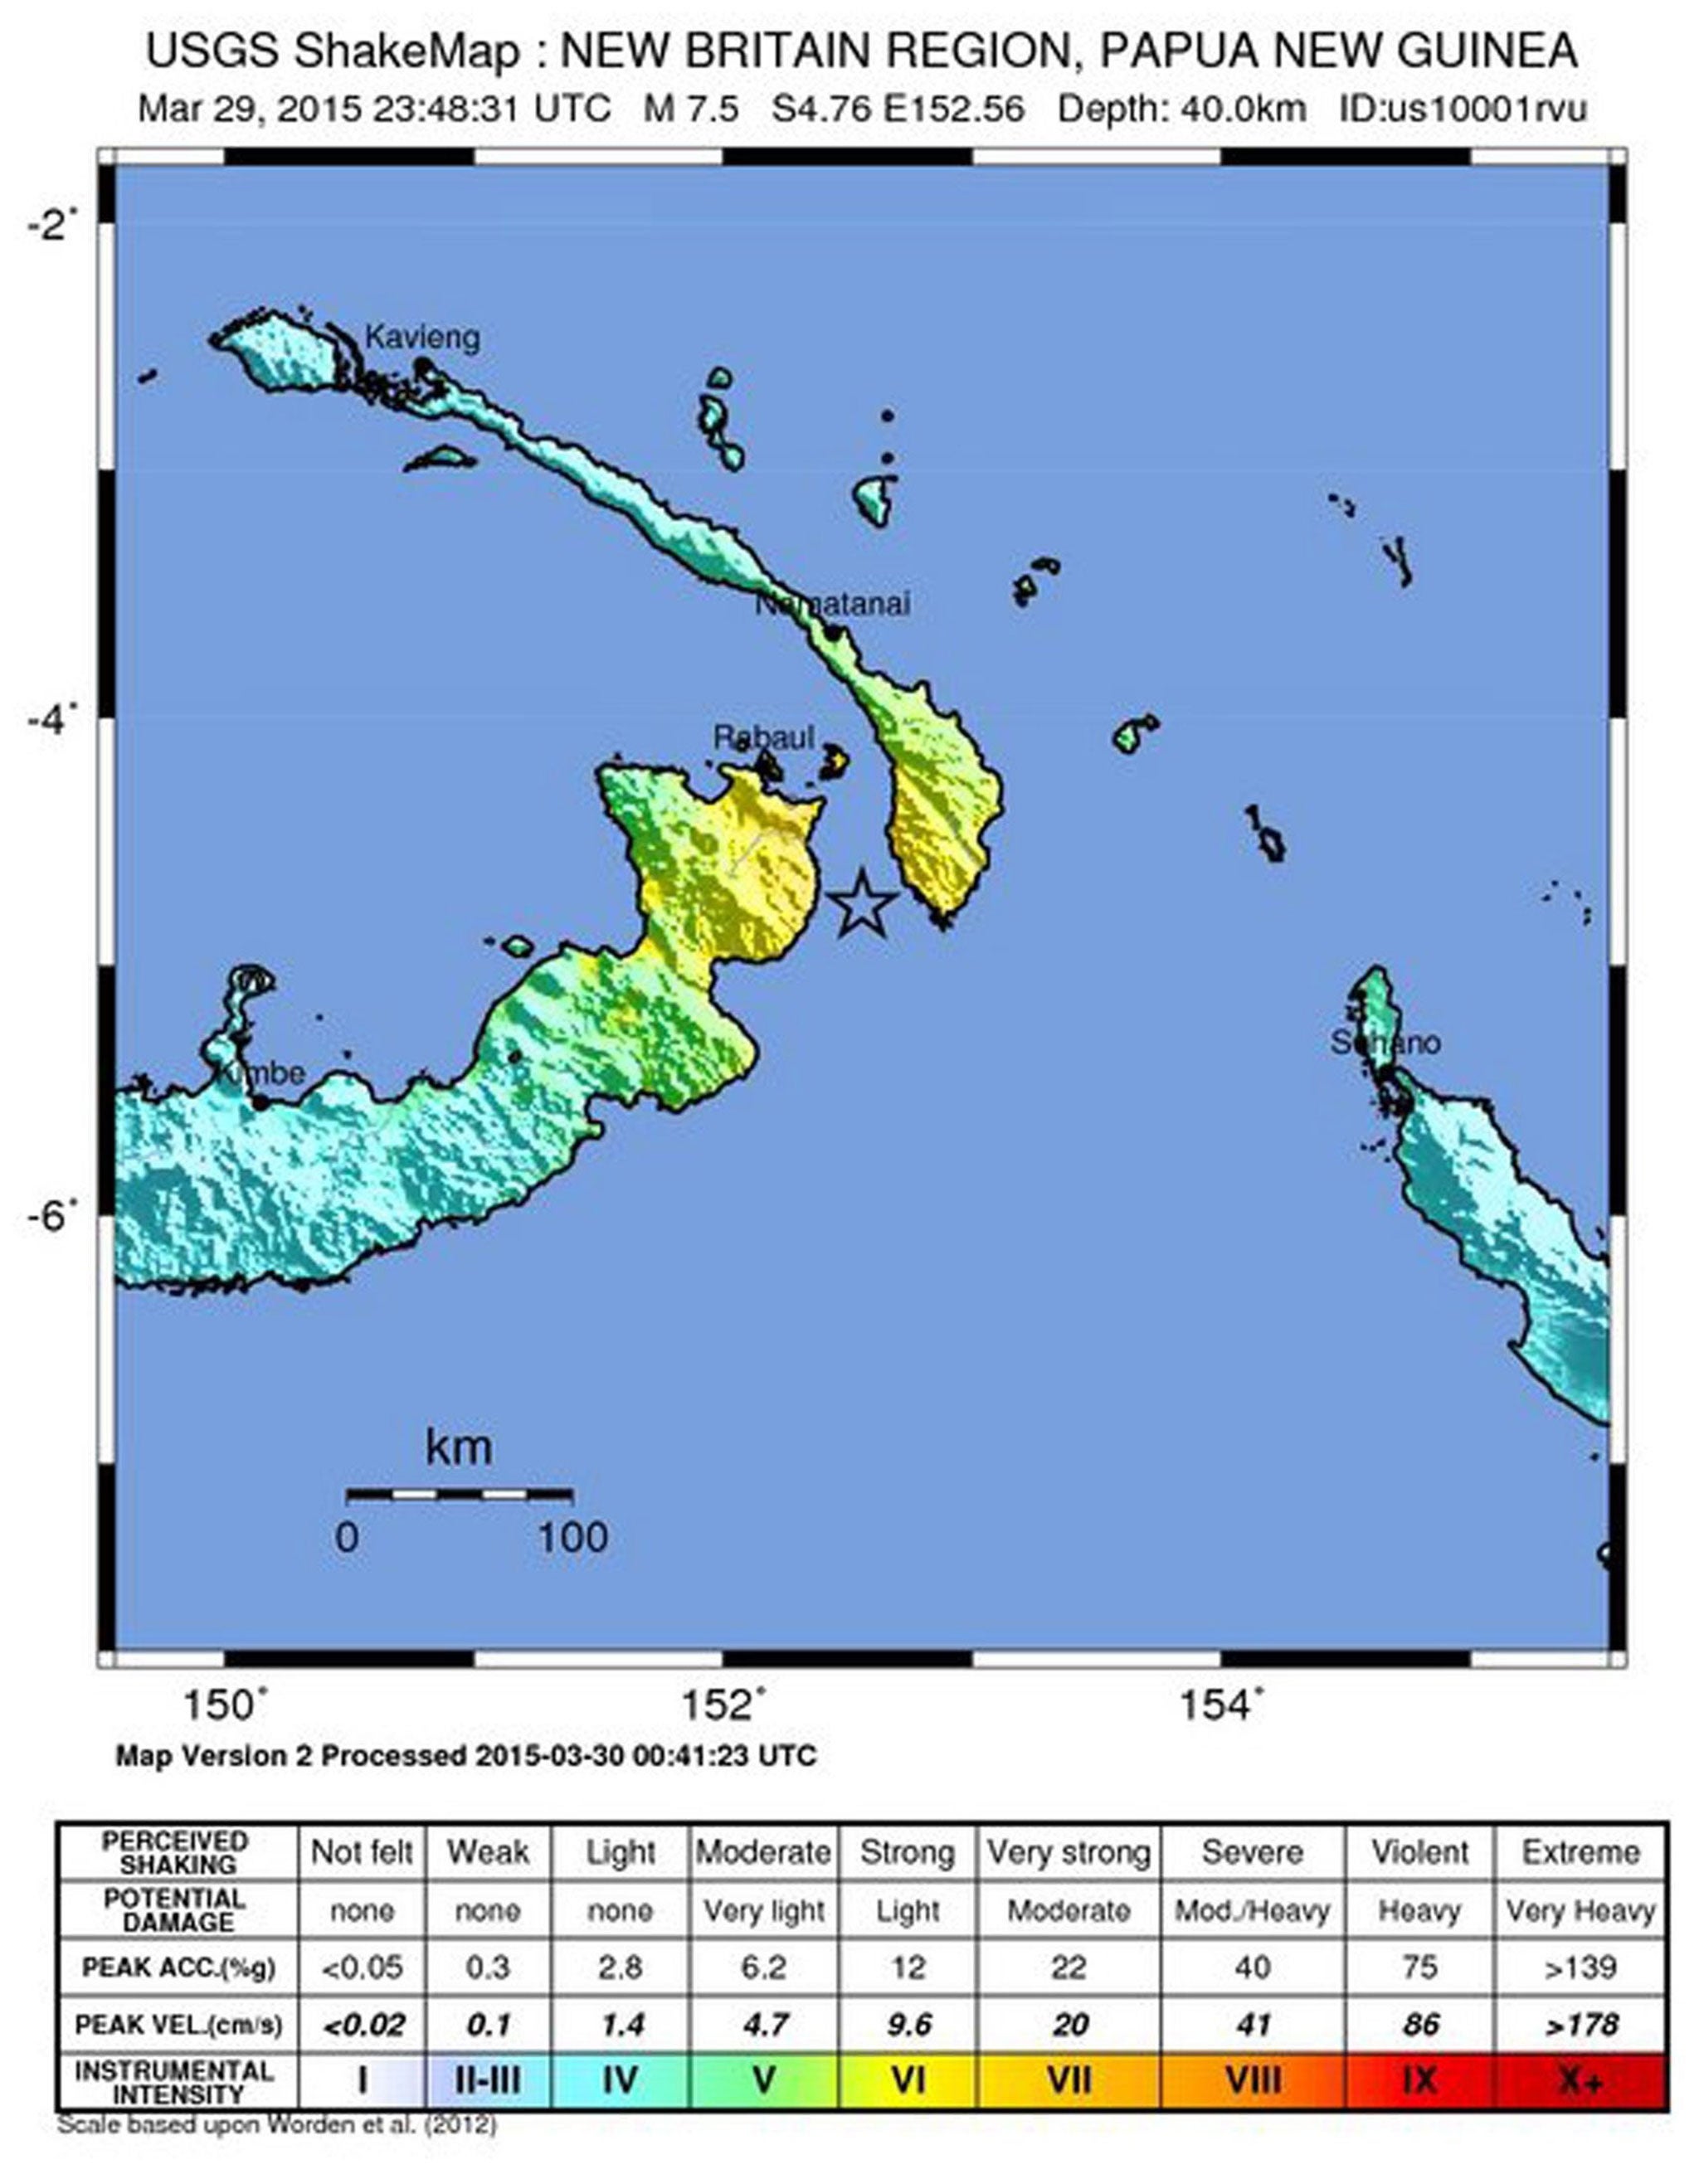 A handout picture released by the United States Geological Survey (USGS) shows a shakemap of the region in Papua New Guinea (PNG) where a 7.5 to 7.6 magnitude earthquake occurred on 30 March 2015